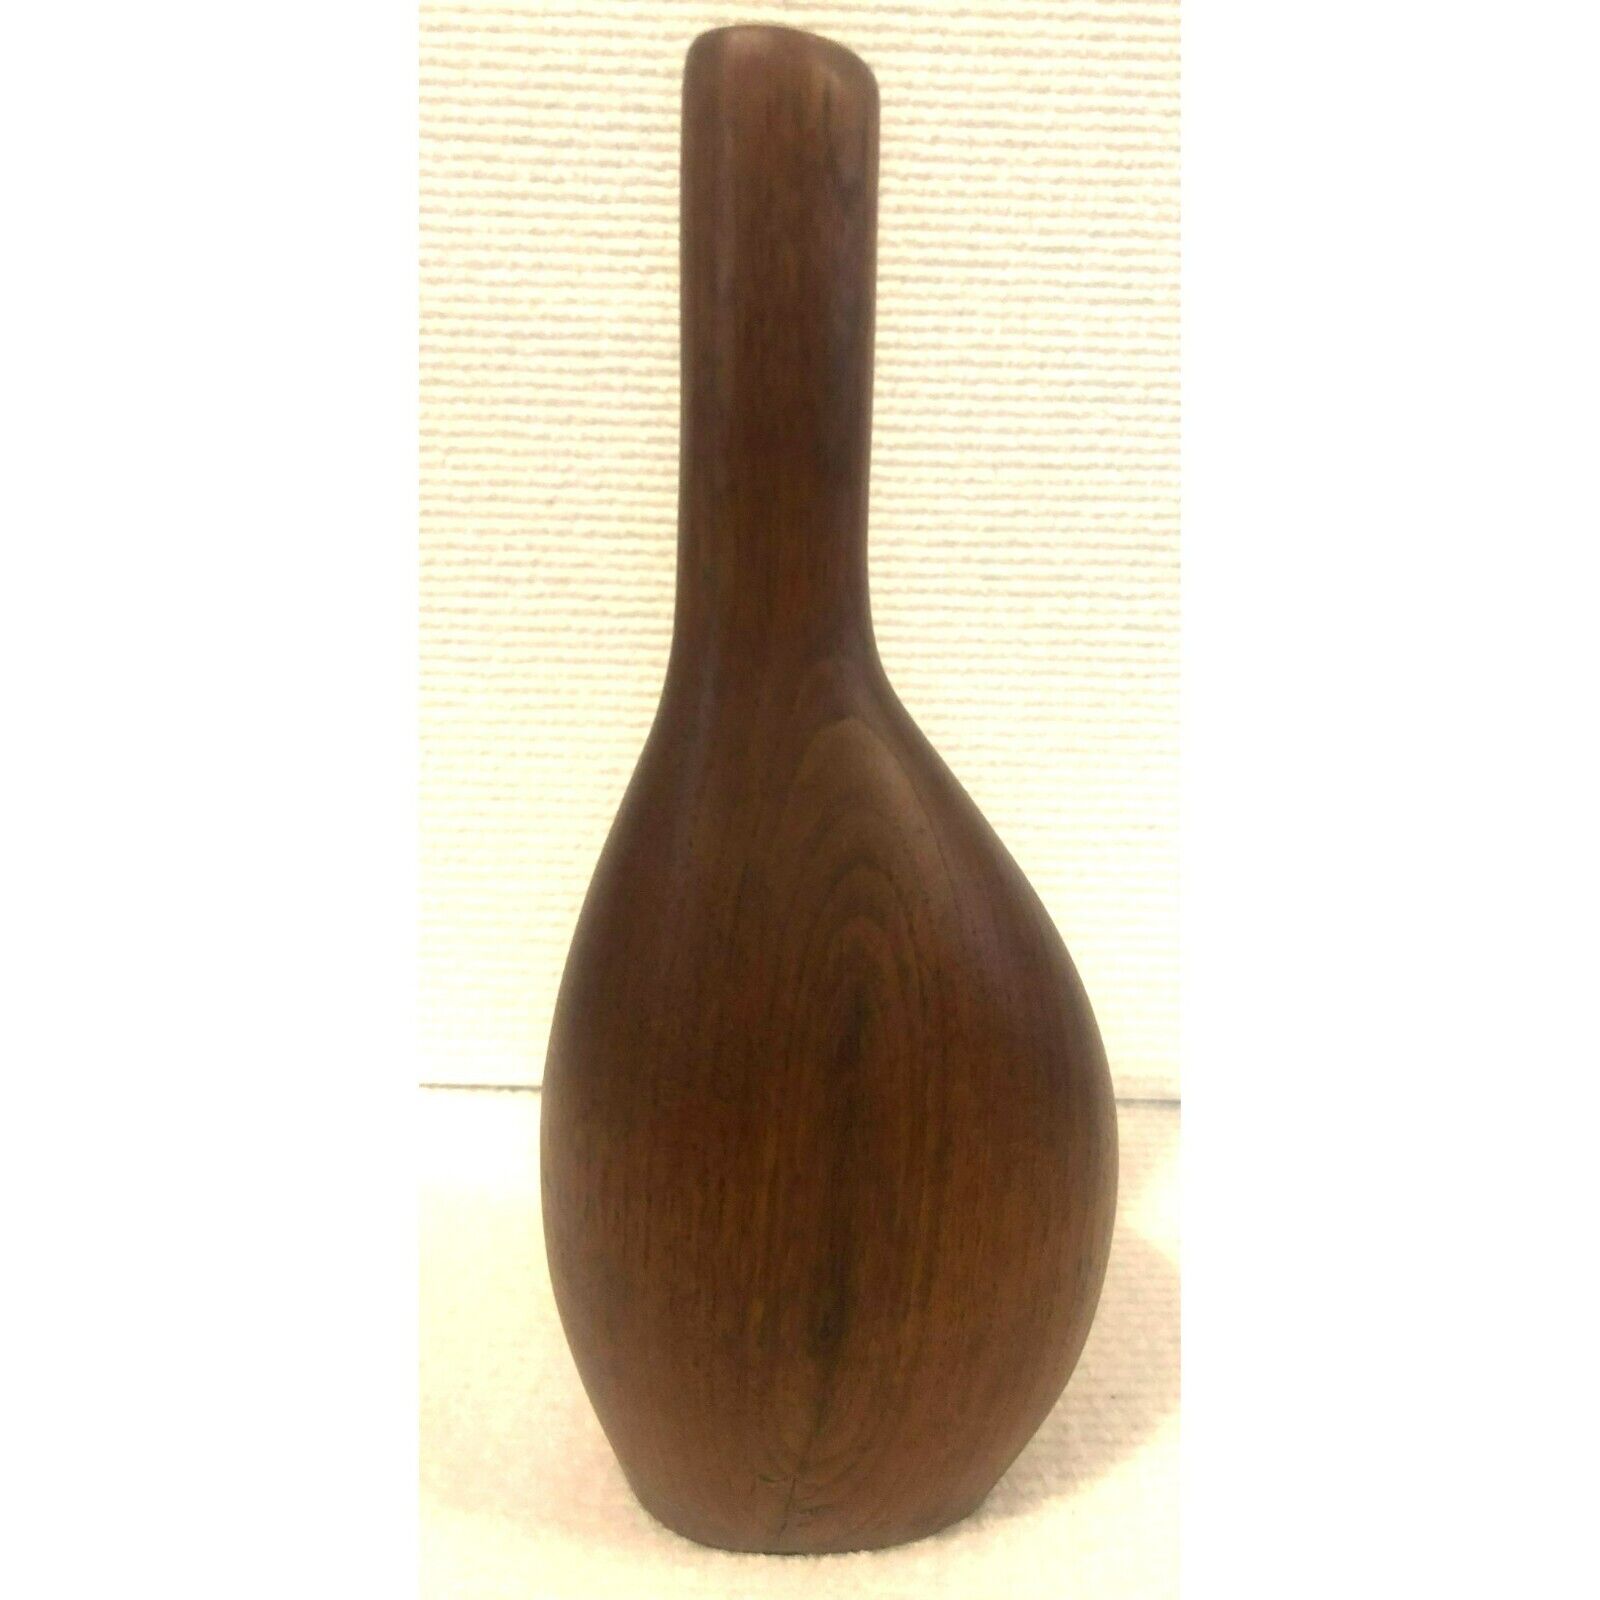 Walnut Hand Turned Wooden Bud Vase Hand Crafted Signed OOAK